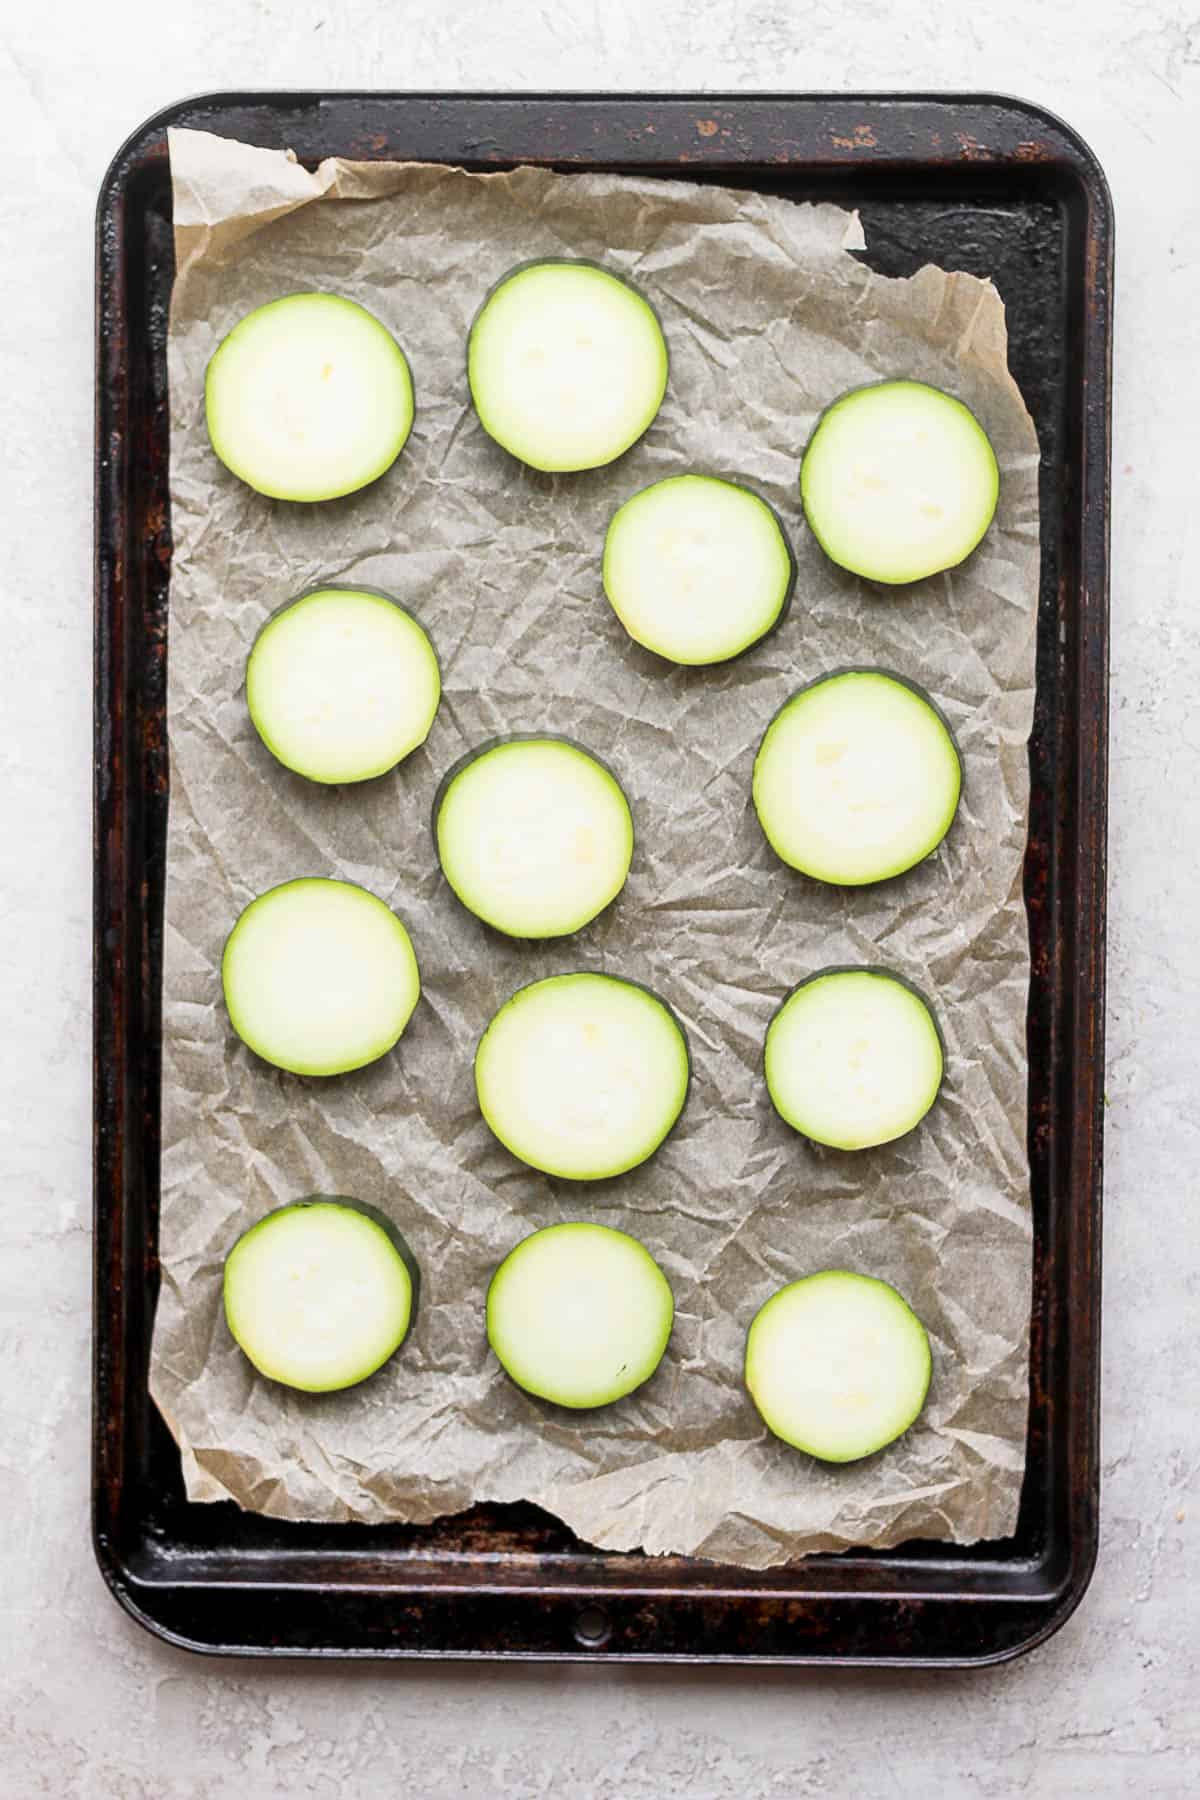 Slices of zucchini on a parchment-lined baking sheet.